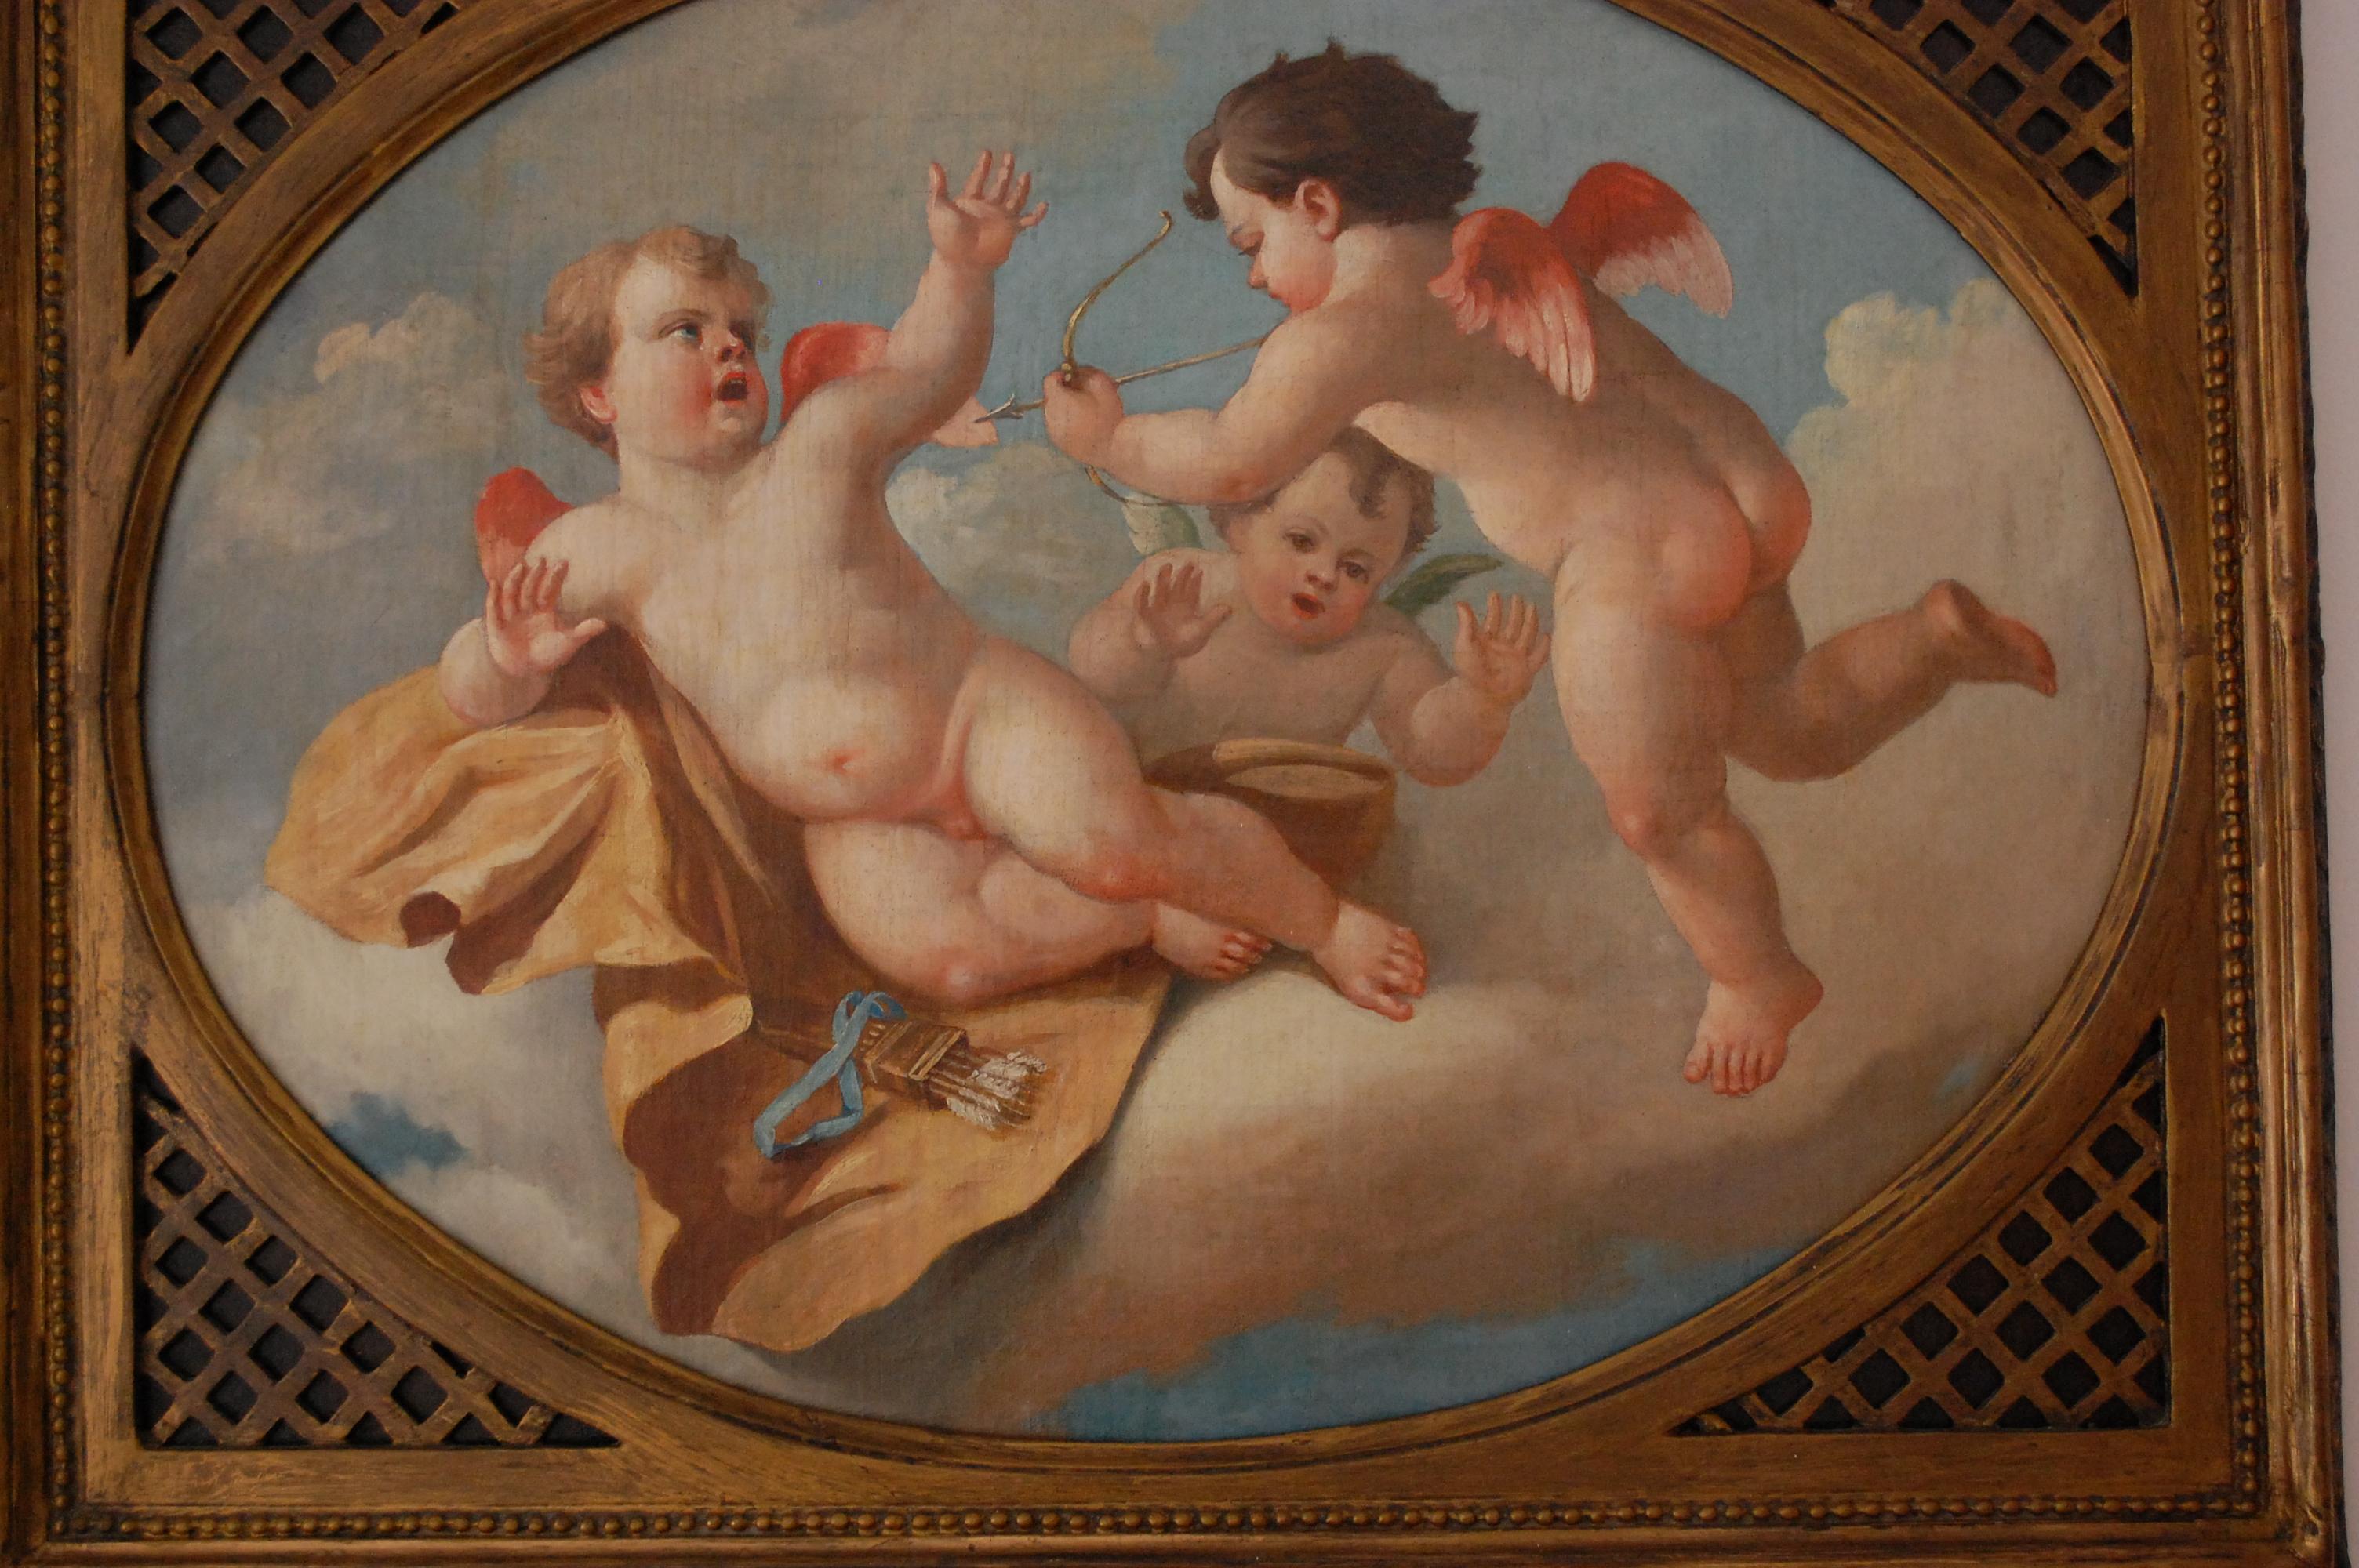  Pair Of 18th Century Cherubs Playing With Bow And Arrow oil paintings.
After Francois Boucher (1703-1770)
Boucher is known for his idyllic and voluptuous paintings on classical themes, decorative allegories, and pastoral scenes.
 Pair of charming